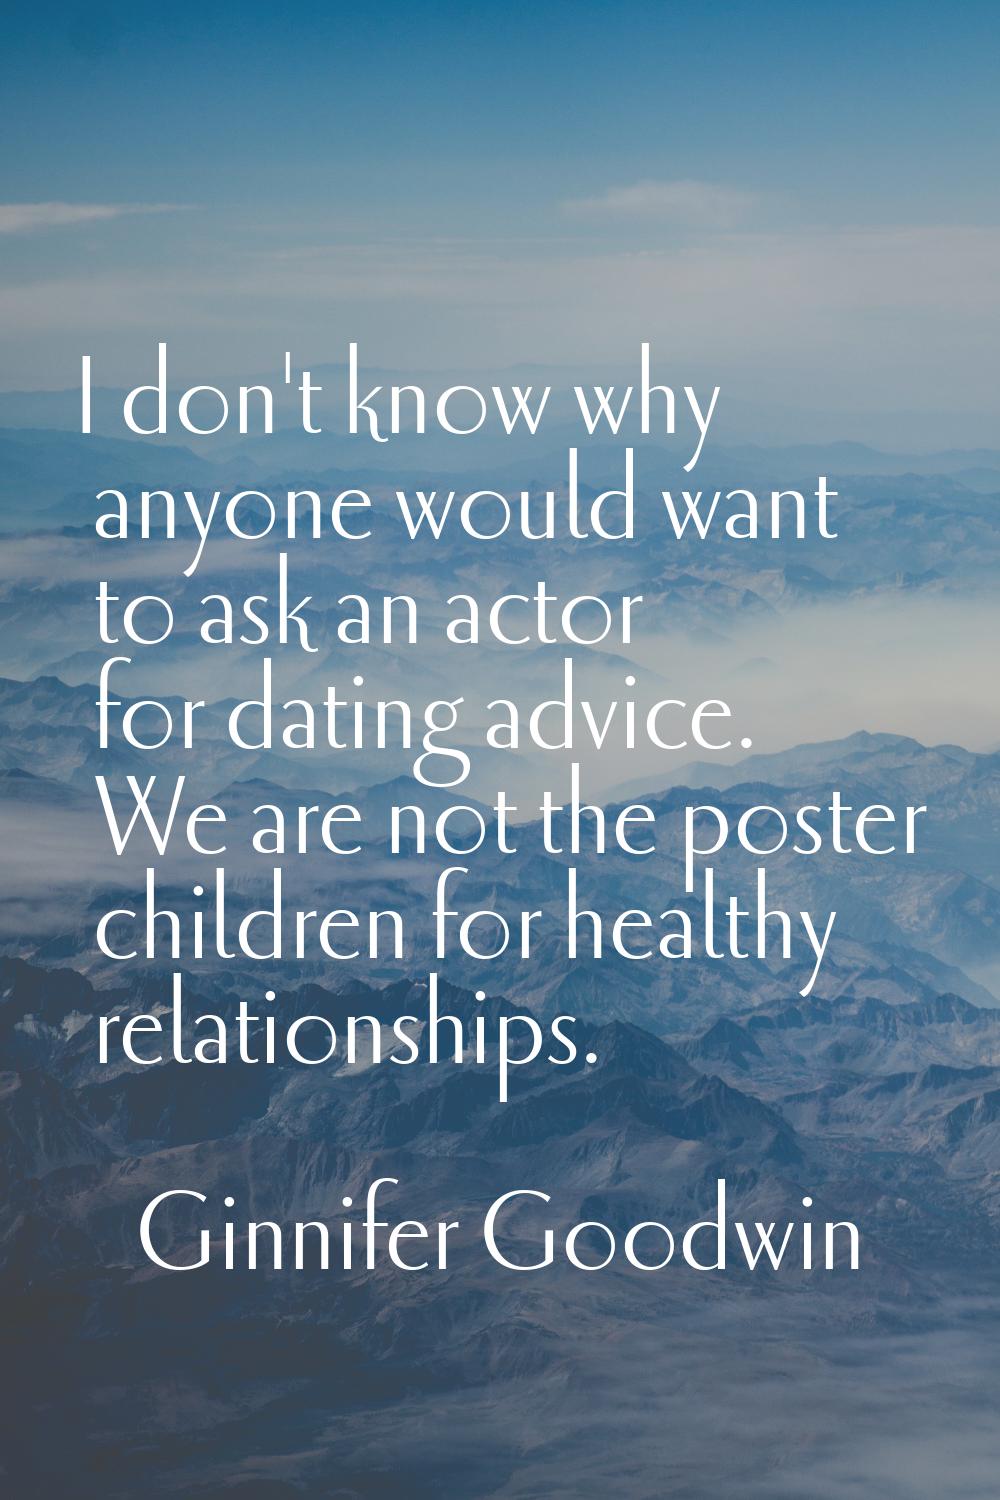 I don't know why anyone would want to ask an actor for dating advice. We are not the poster childre